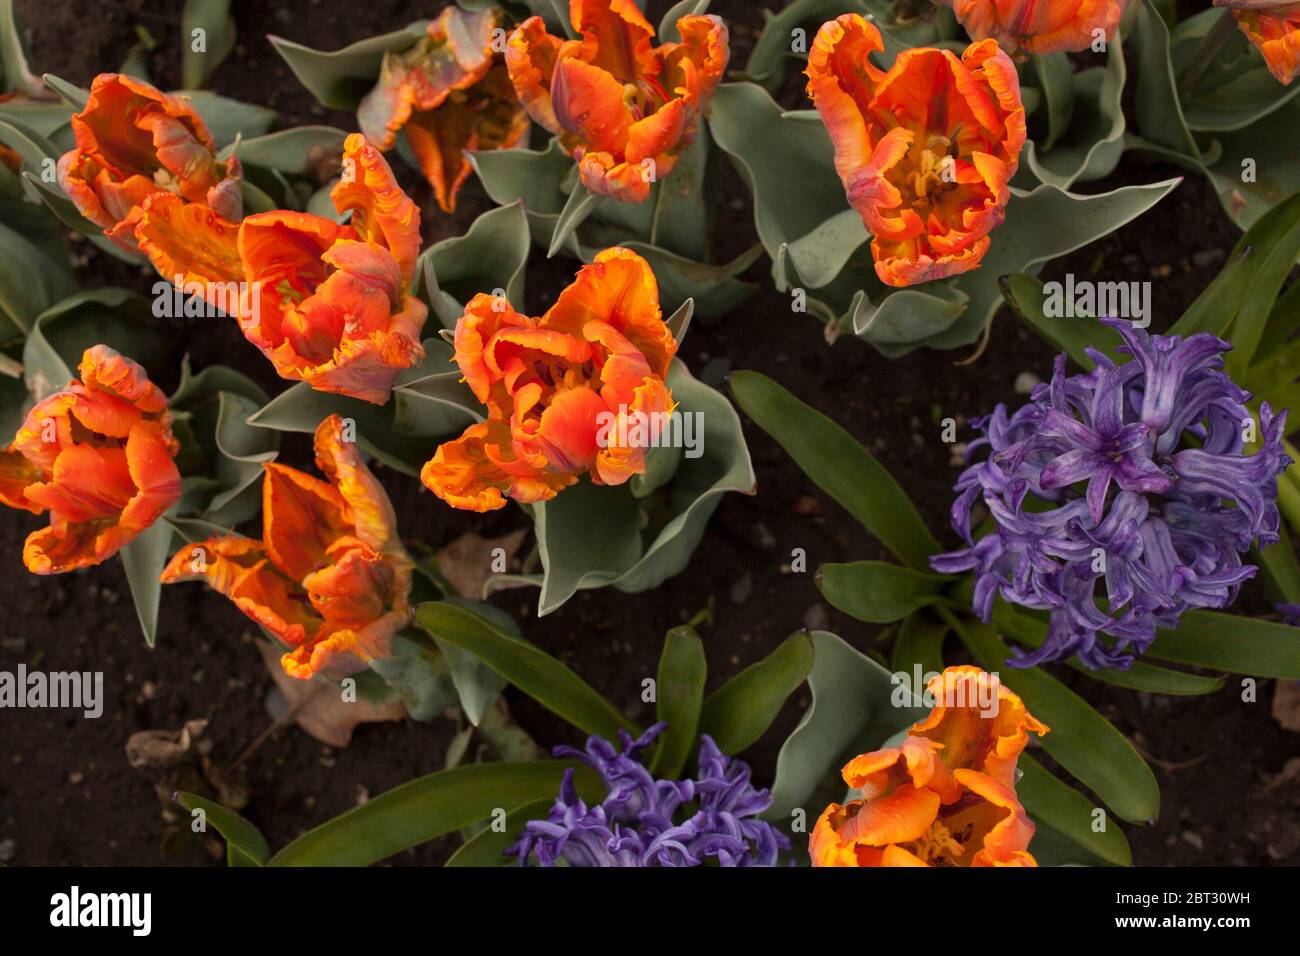 Orange Princess Irene Parrot tulip with hyacinth in a flower bed in a part in Albany, NY. Stock Photo